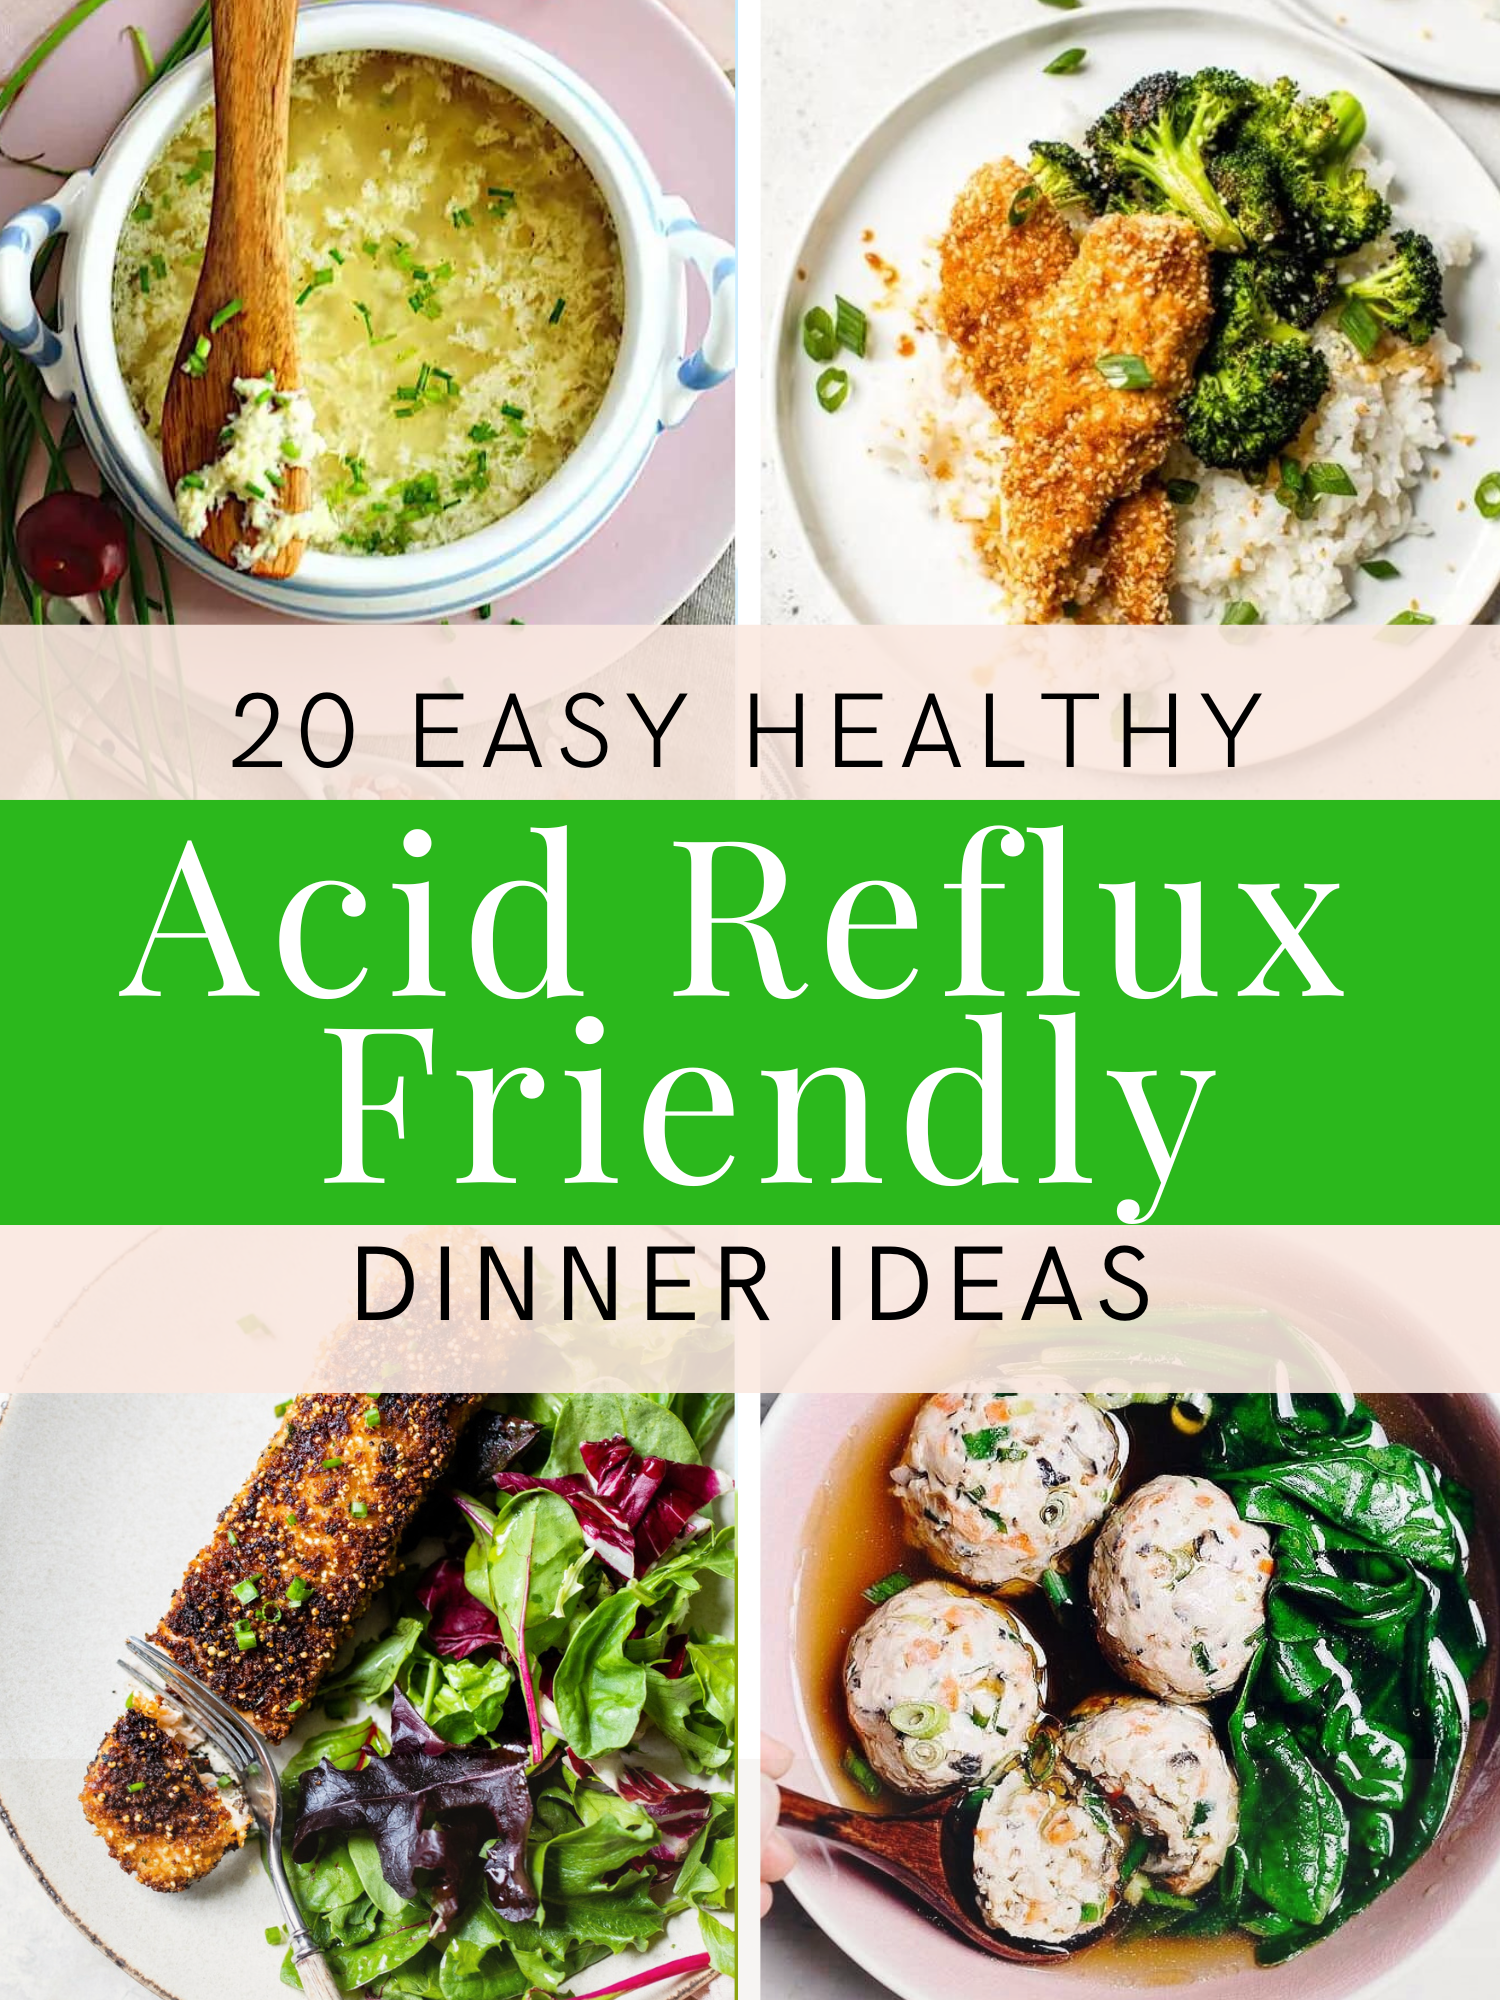 Images of different easy healthy acid reflux friendly recipes